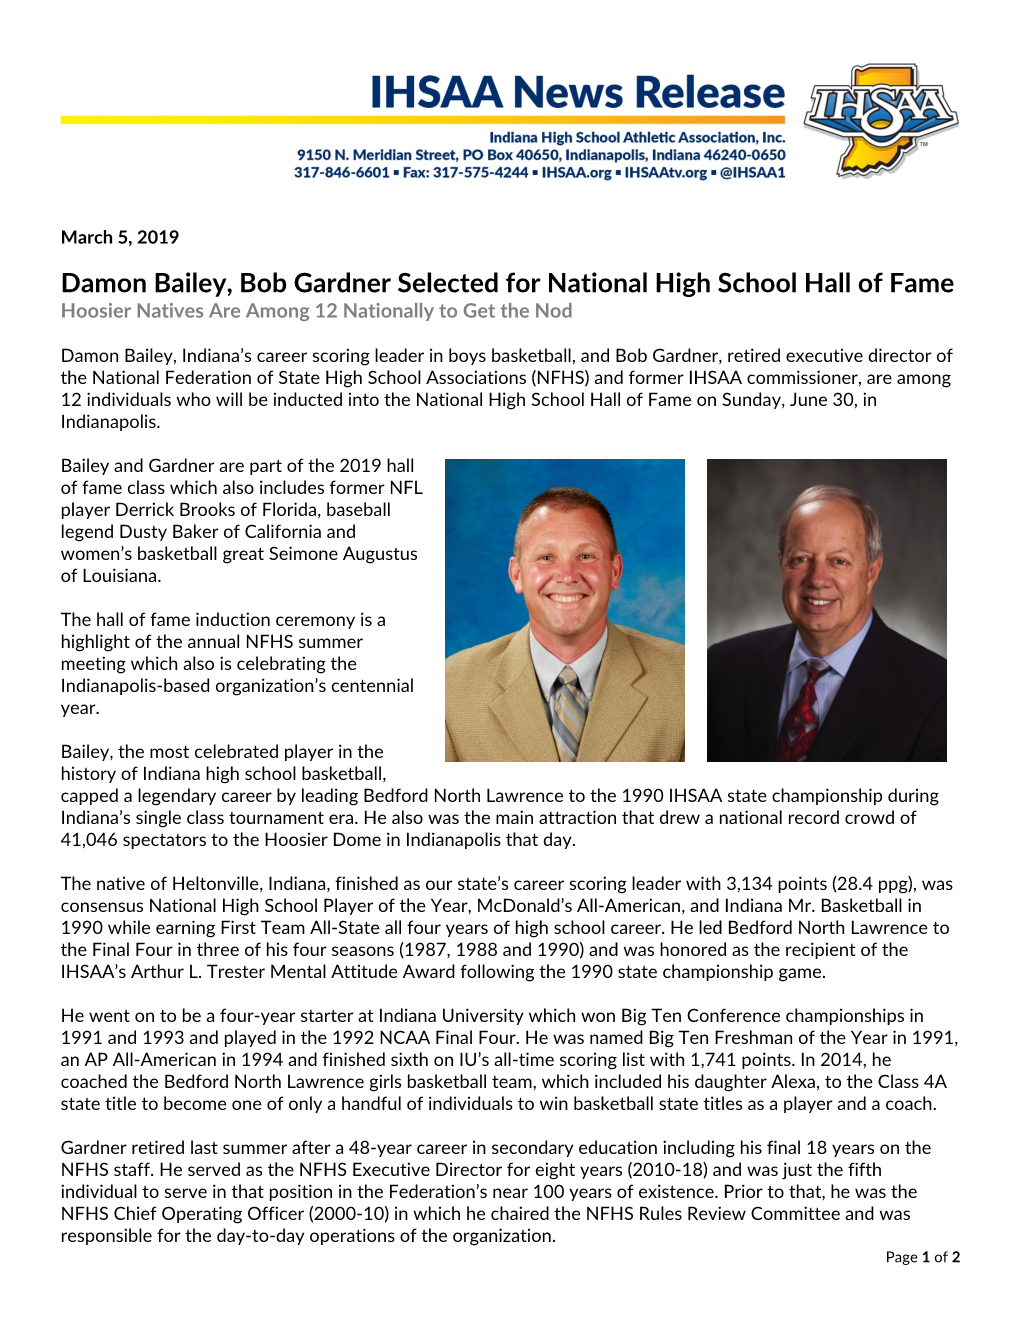 Damon Bailey, Bob Gardner Selected for National High School Hall of Fame Hoosier Natives Are Among 12 Nationally to Get the Nod